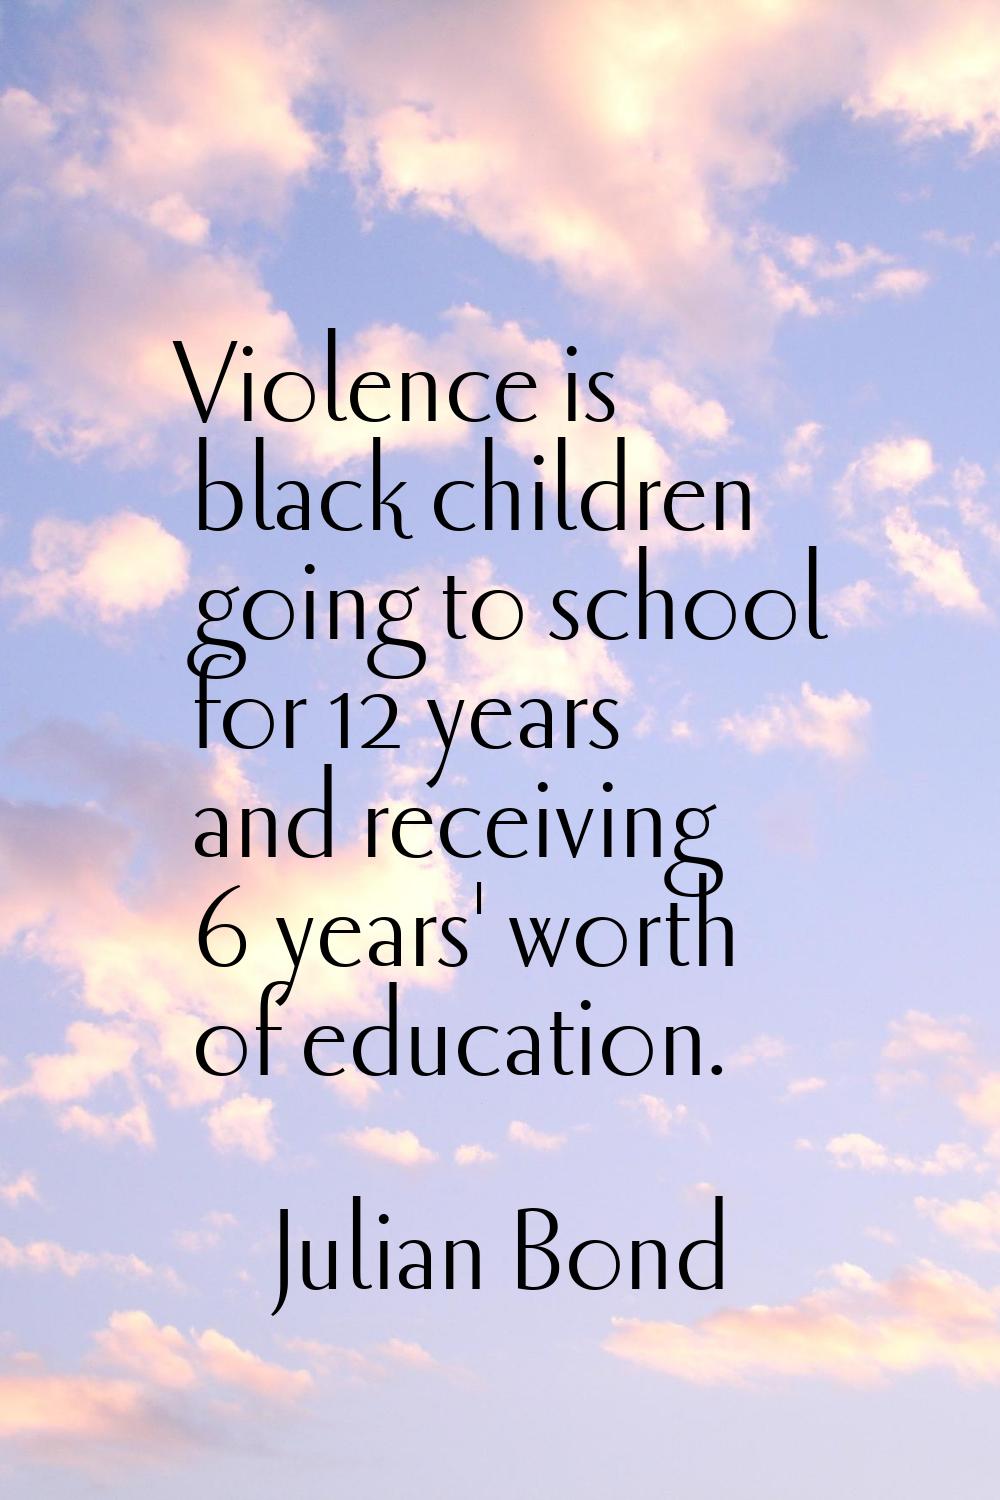 Violence is black children going to school for 12 years and receiving 6 years' worth of education.